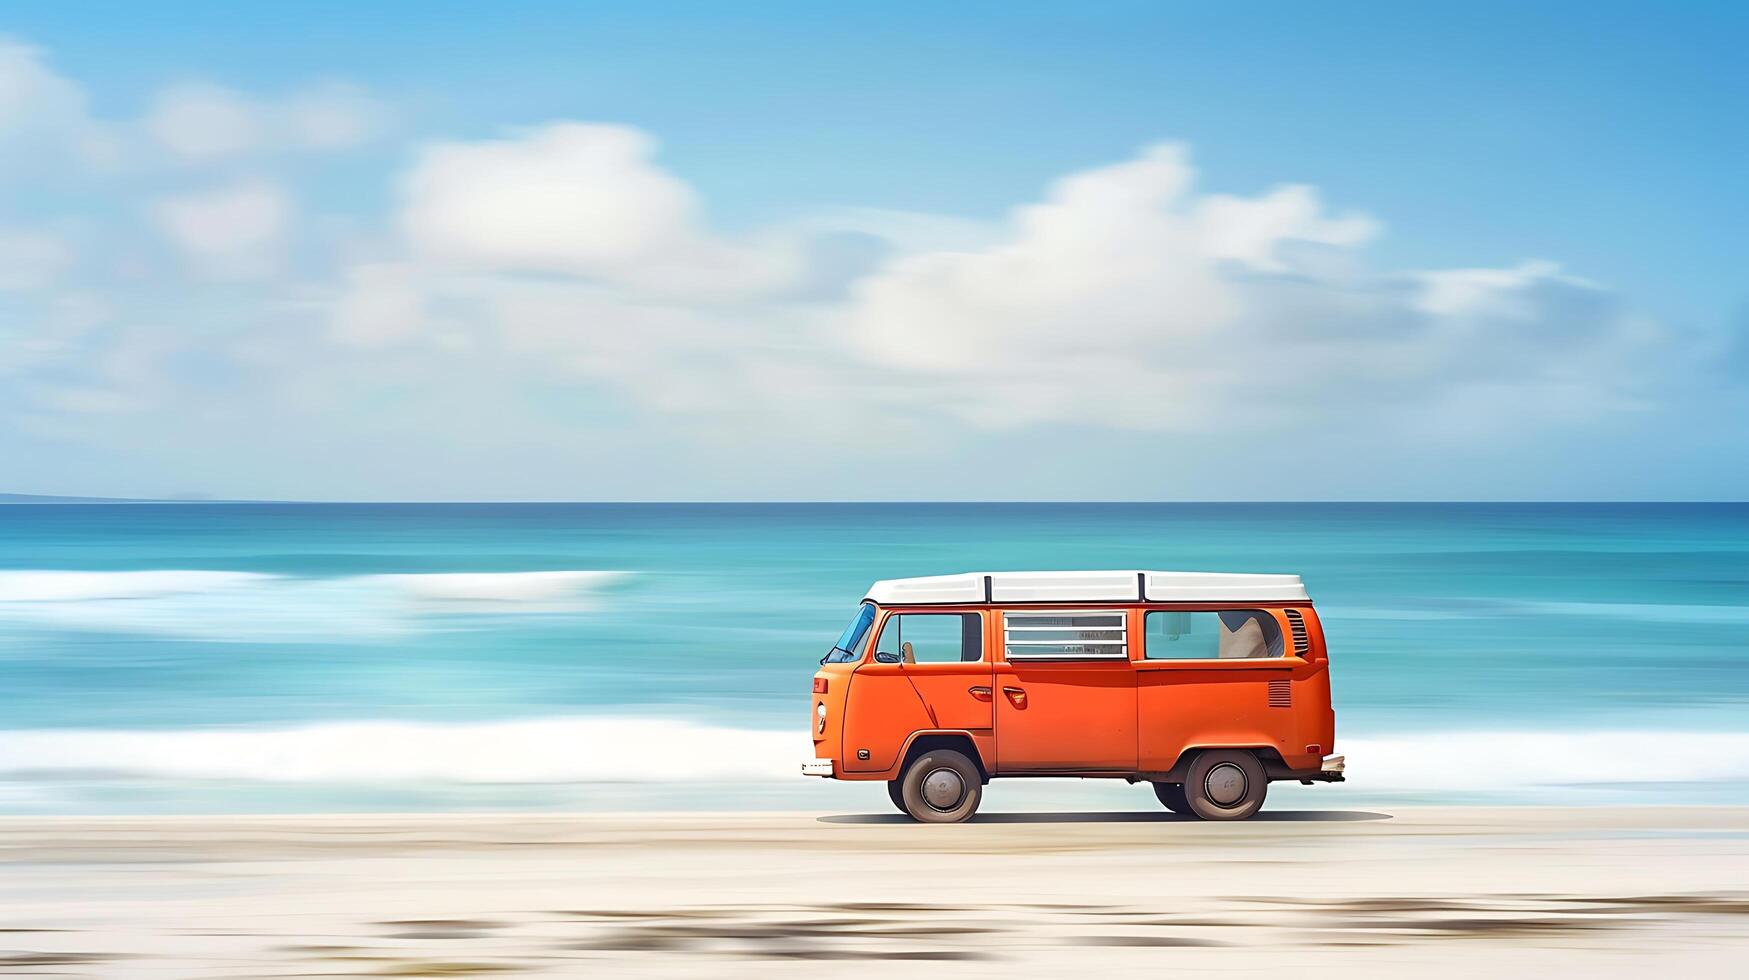 orange van on the beach with sea and blue sky background, paints a peaceful scene. photo